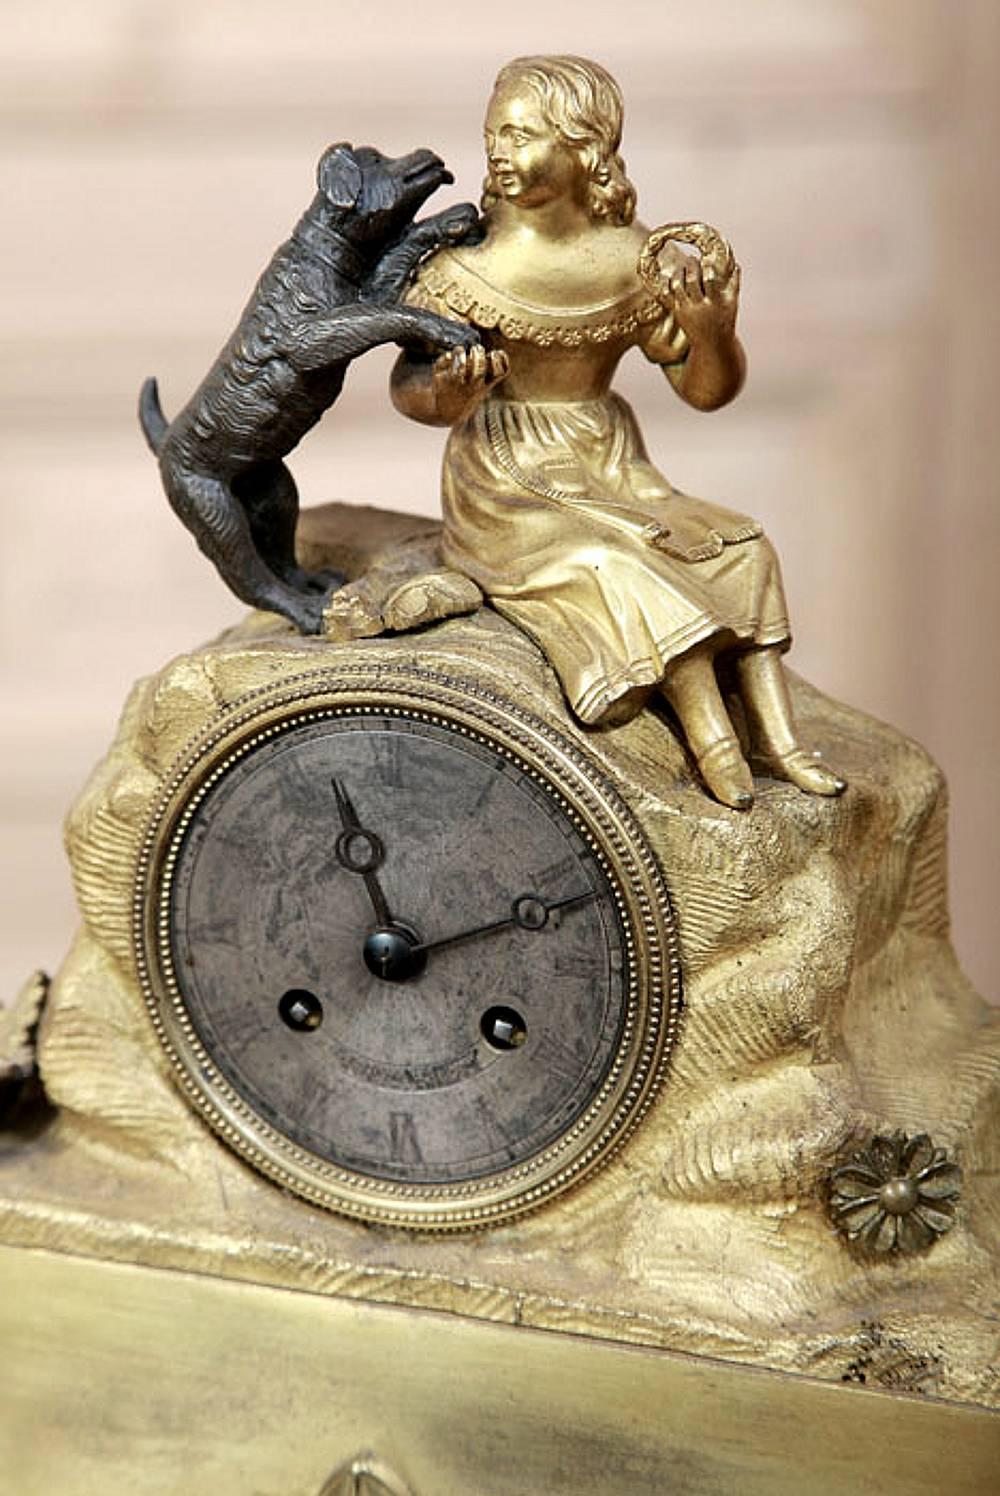 Charming and exquisite is this French gilded bronze mantel clock 